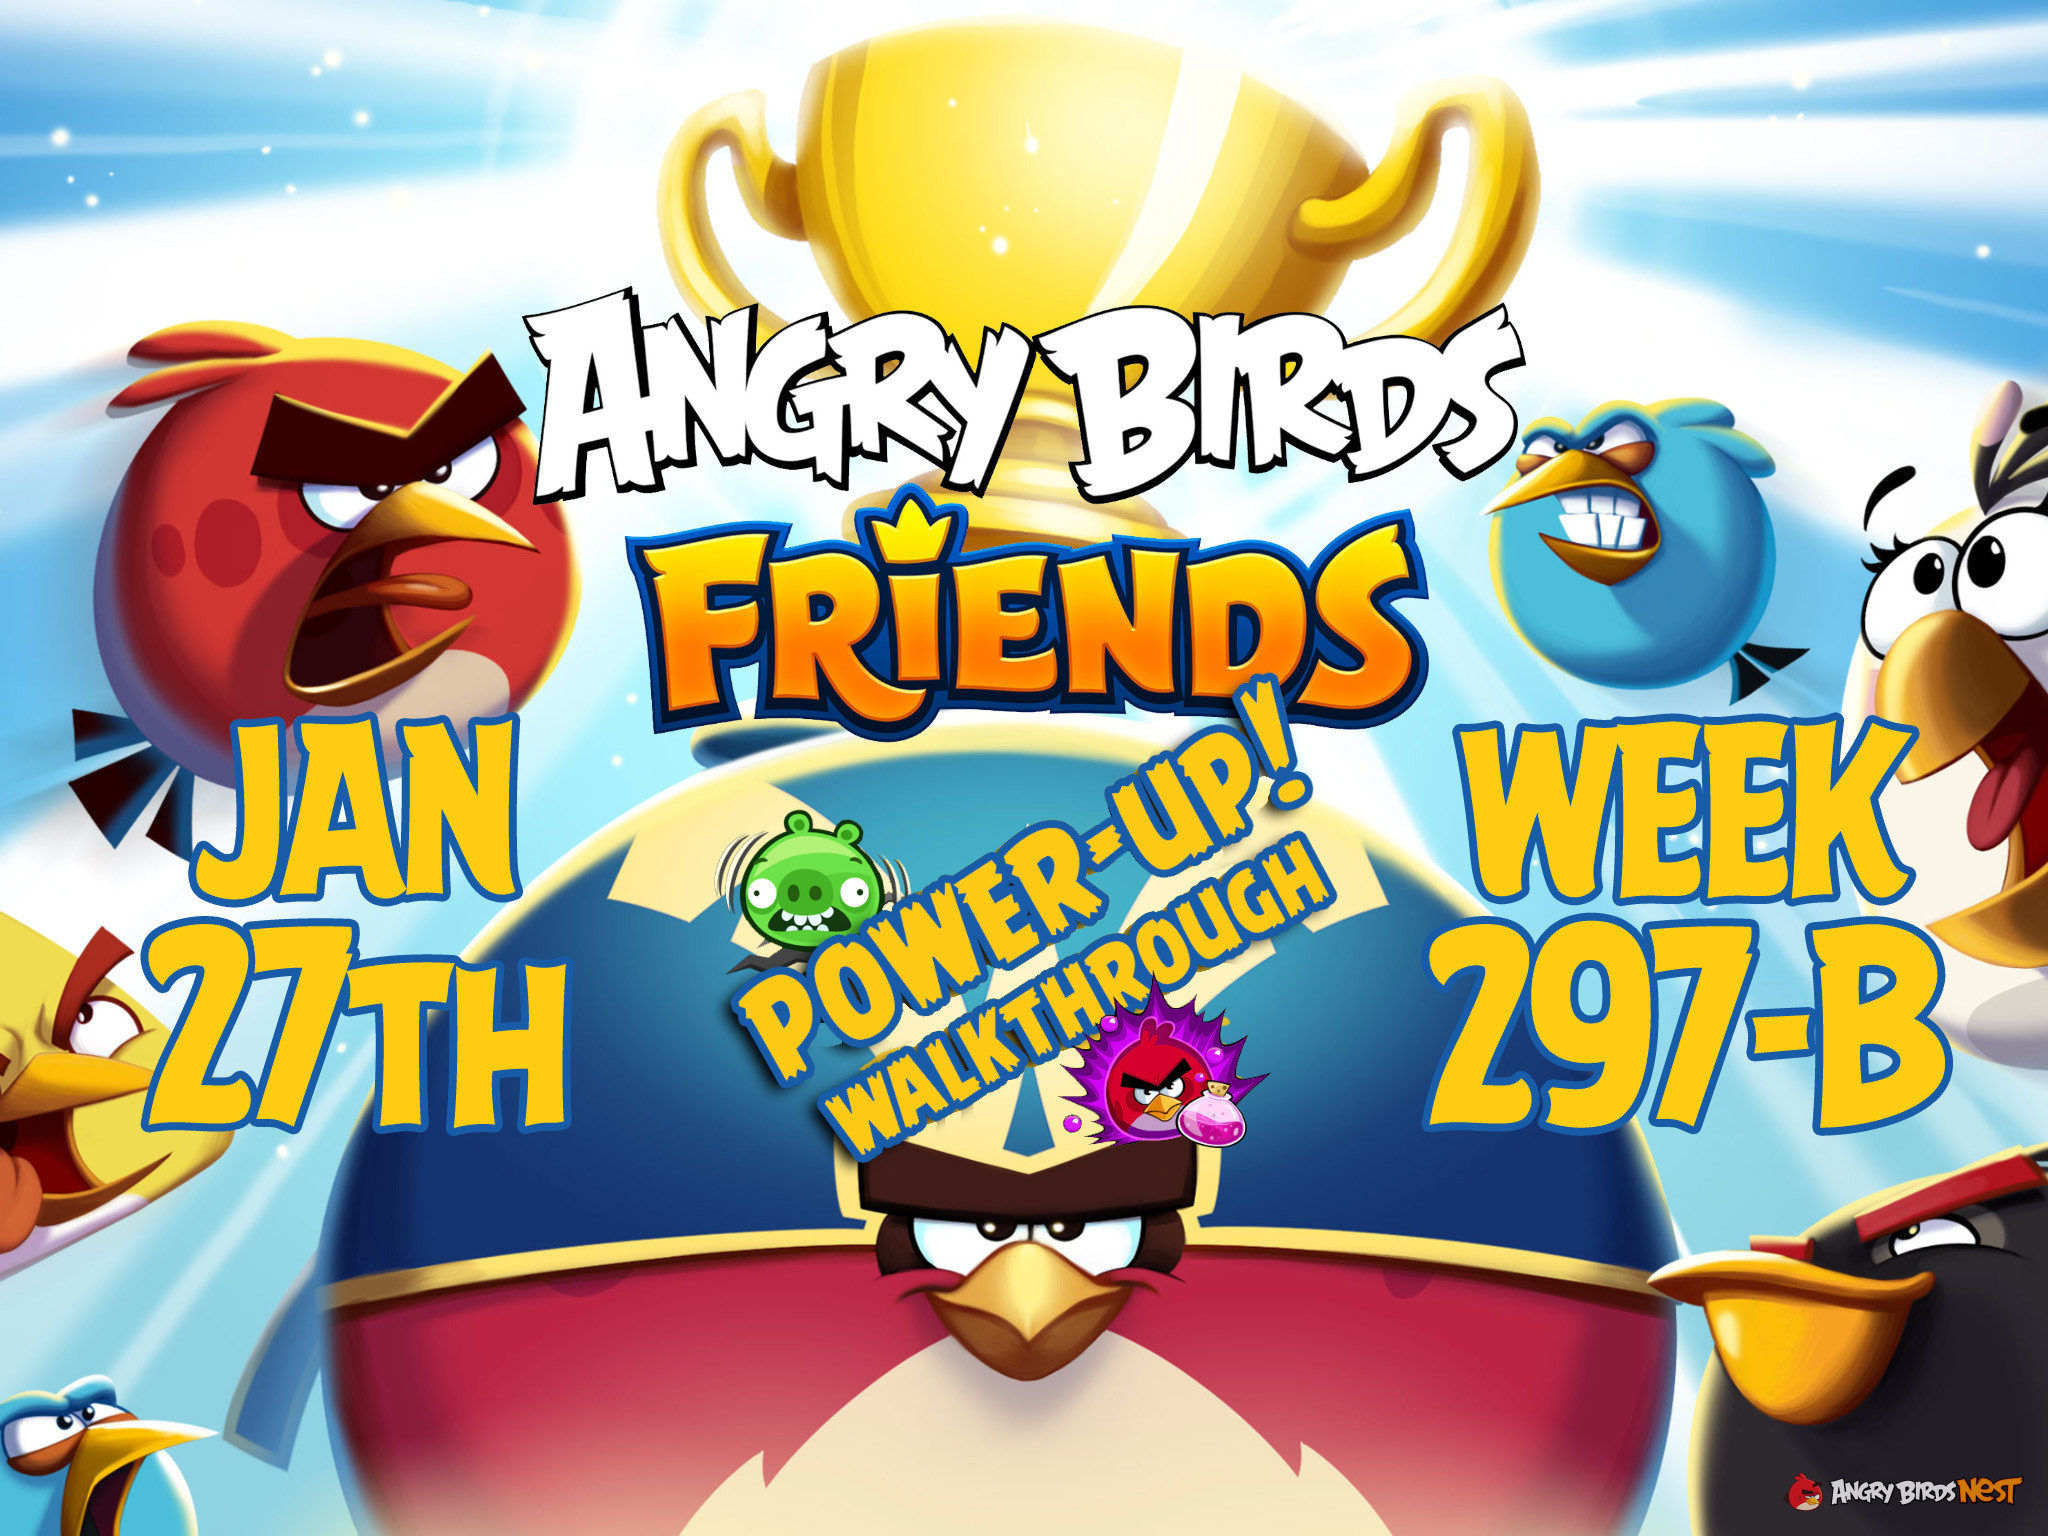 Angry Birds Friends Tournament Week 297-B Feature Image PU